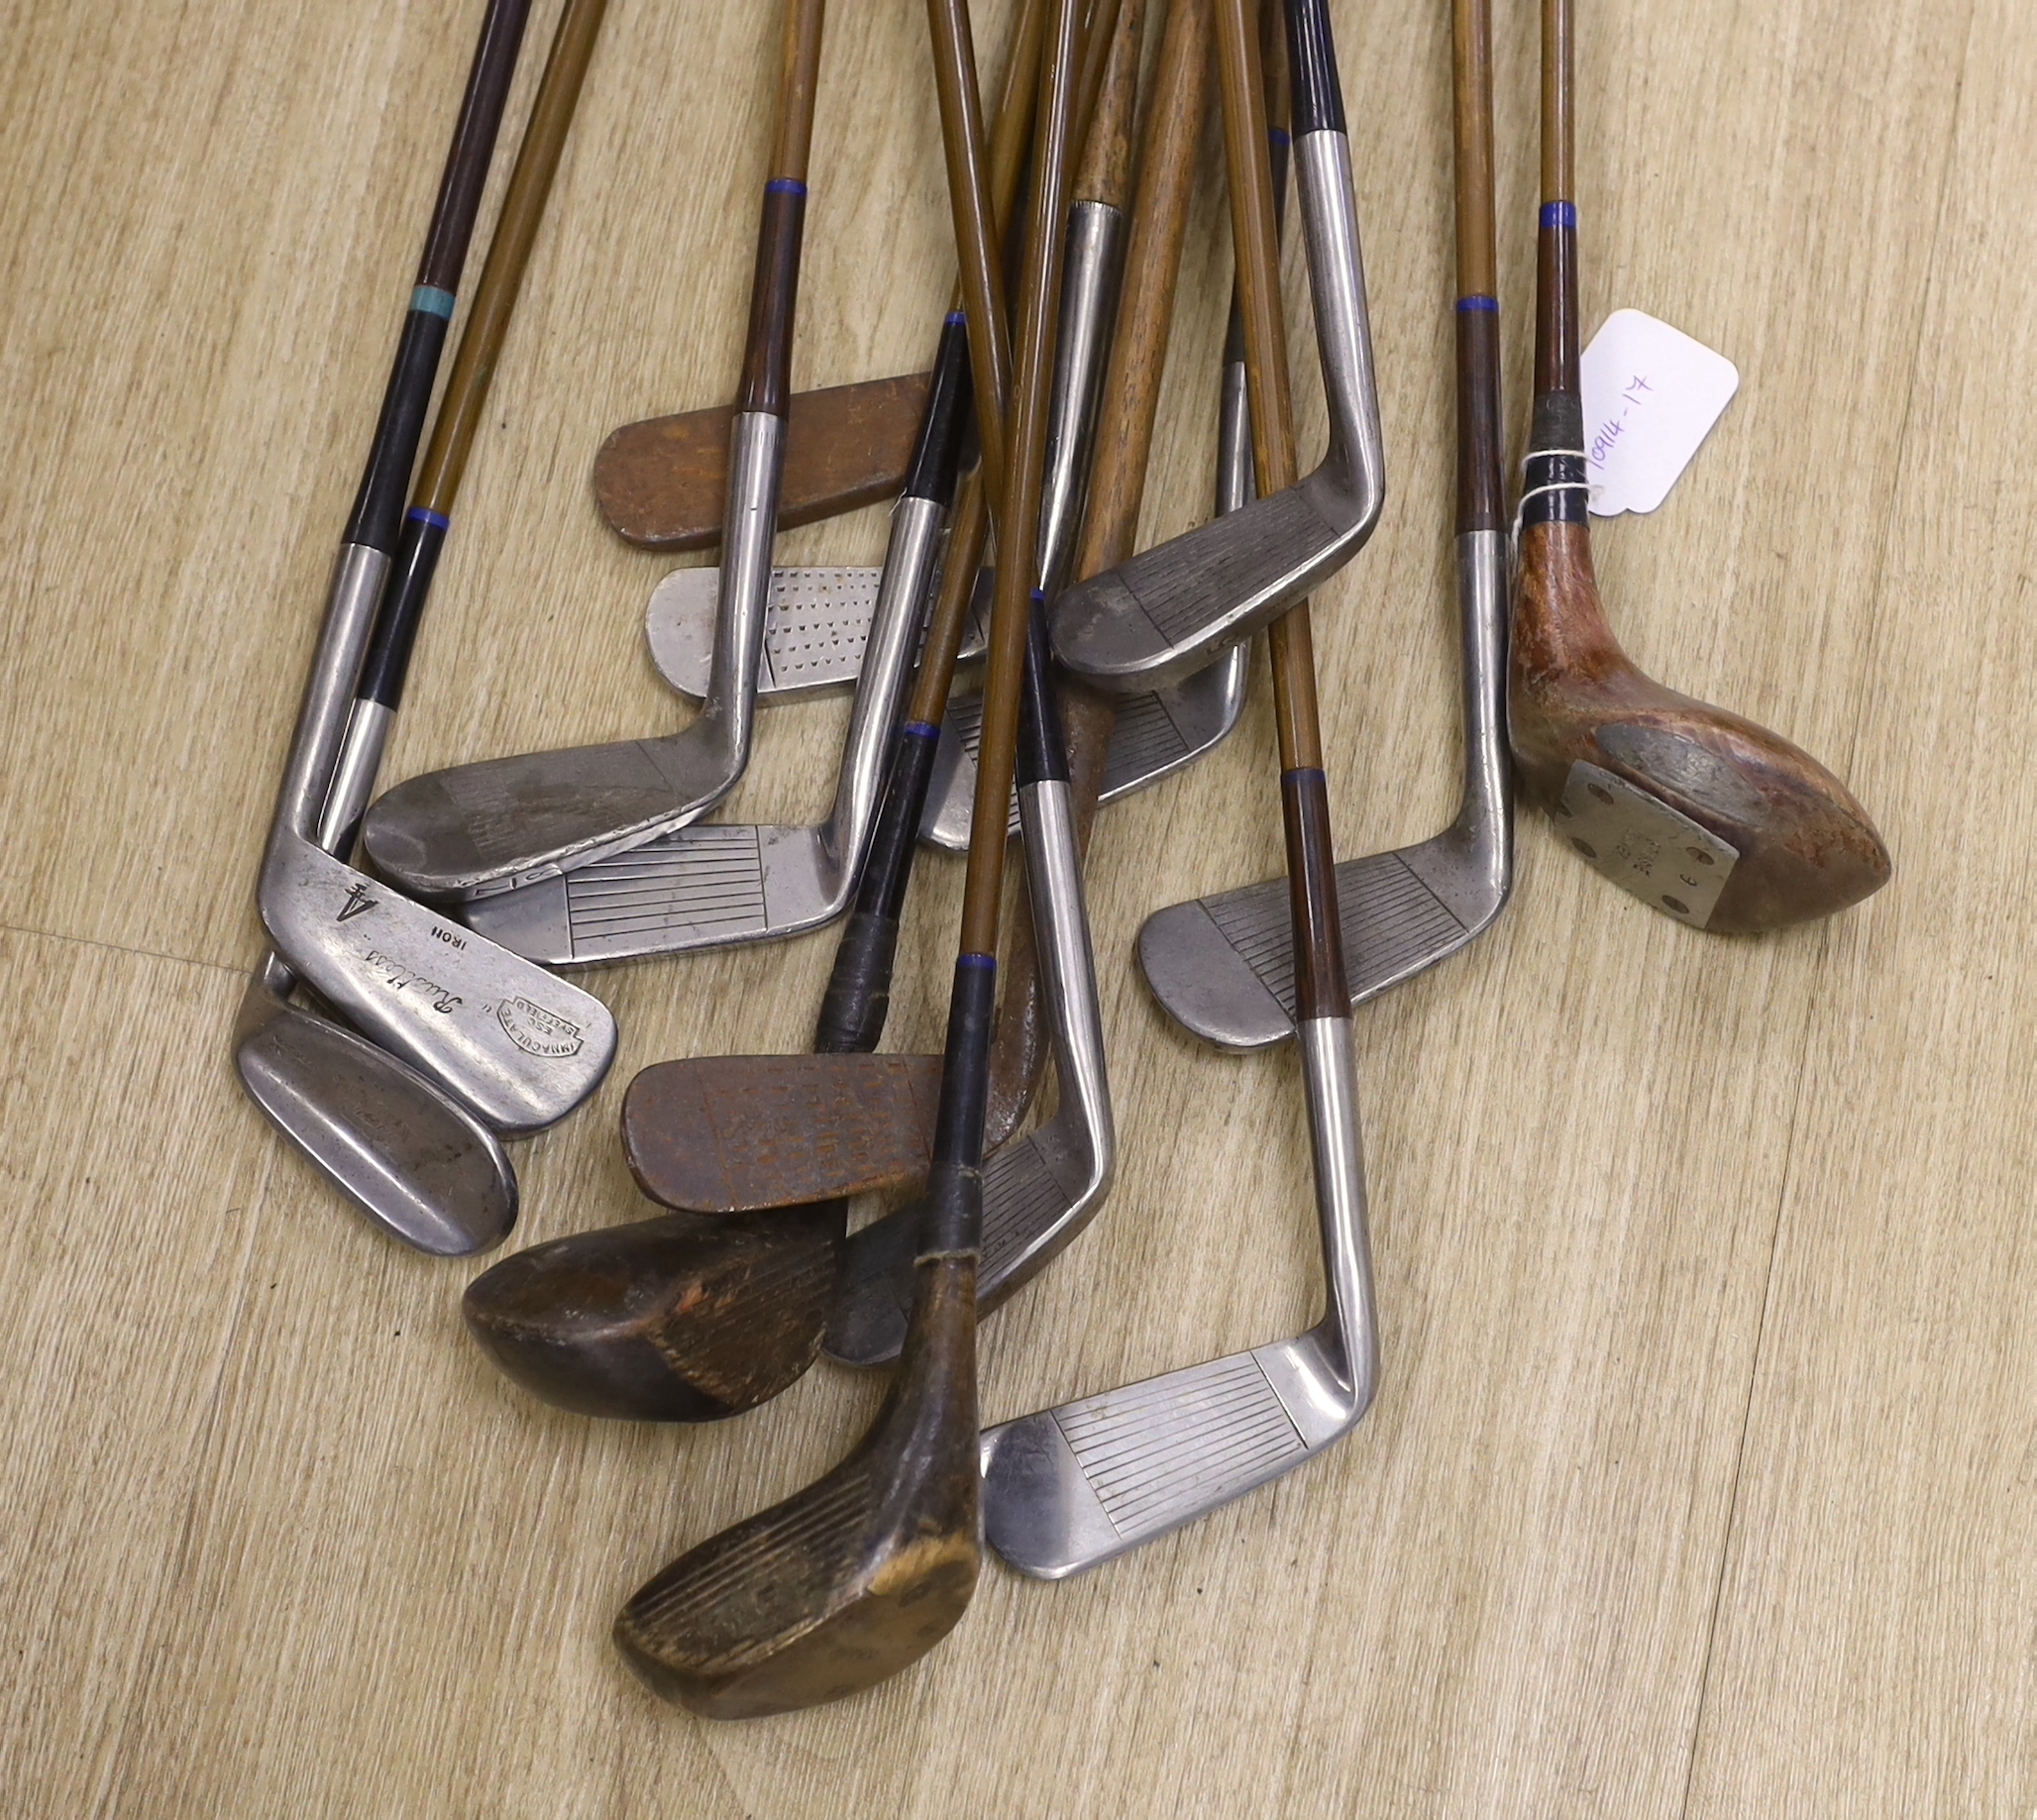 A group of golf clubs